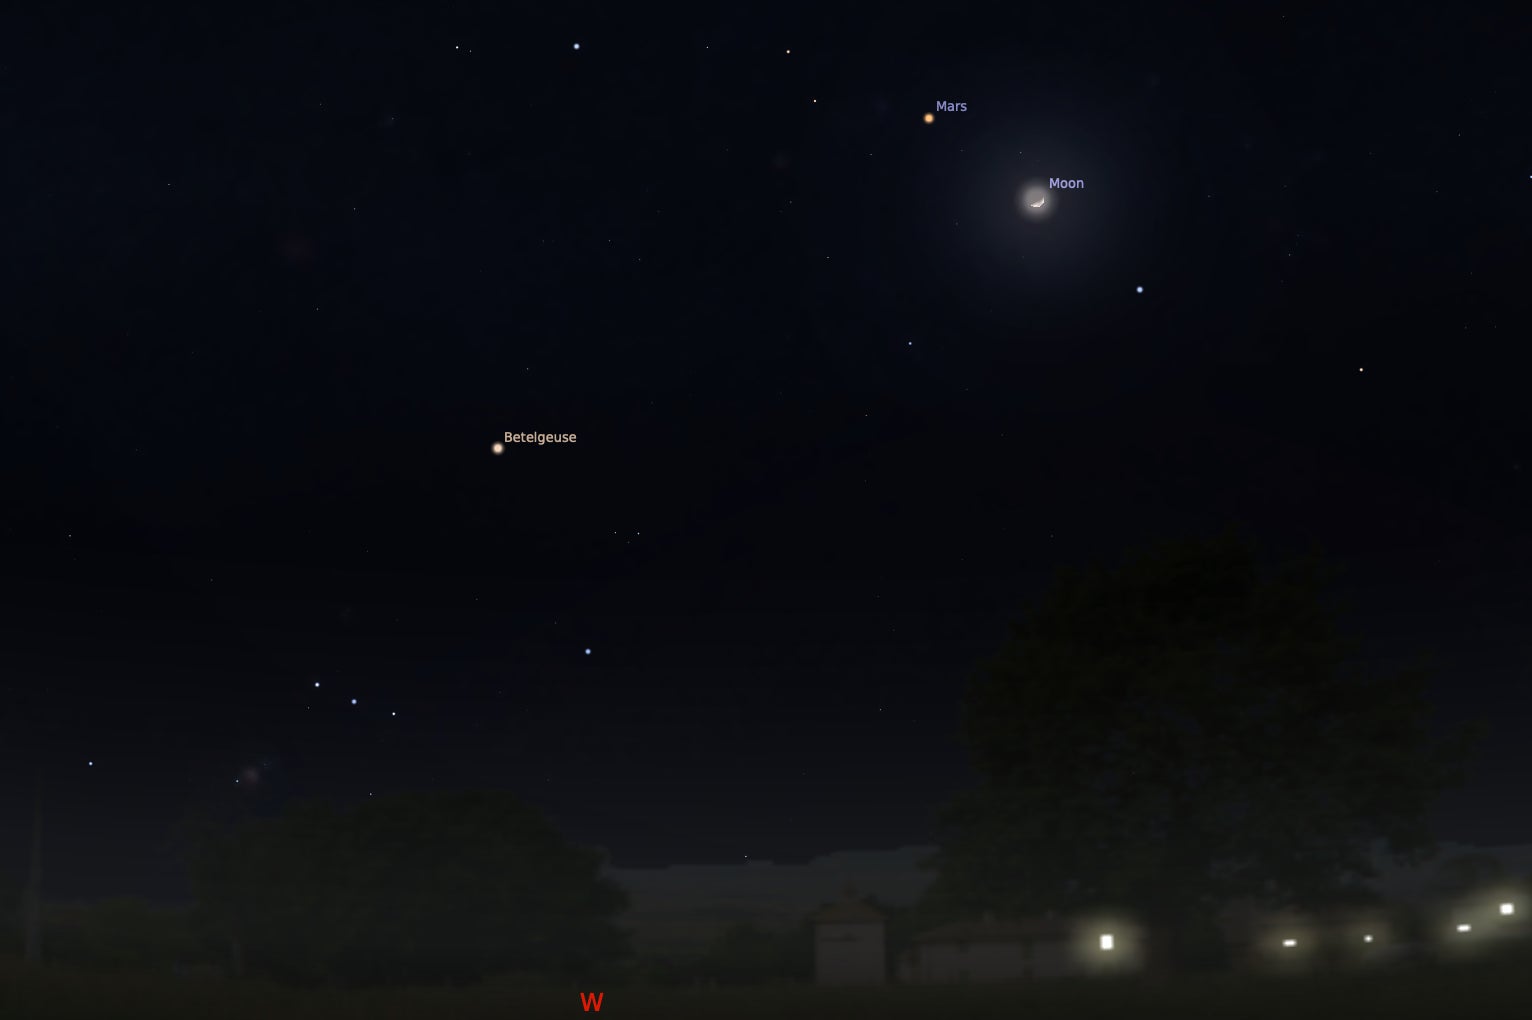 A horizon at night, with Mars and the Moon high in the sky and the star Betelgeuse to their left, as they will appear in the planetary alignment of Tuesday, March 28, 2023.